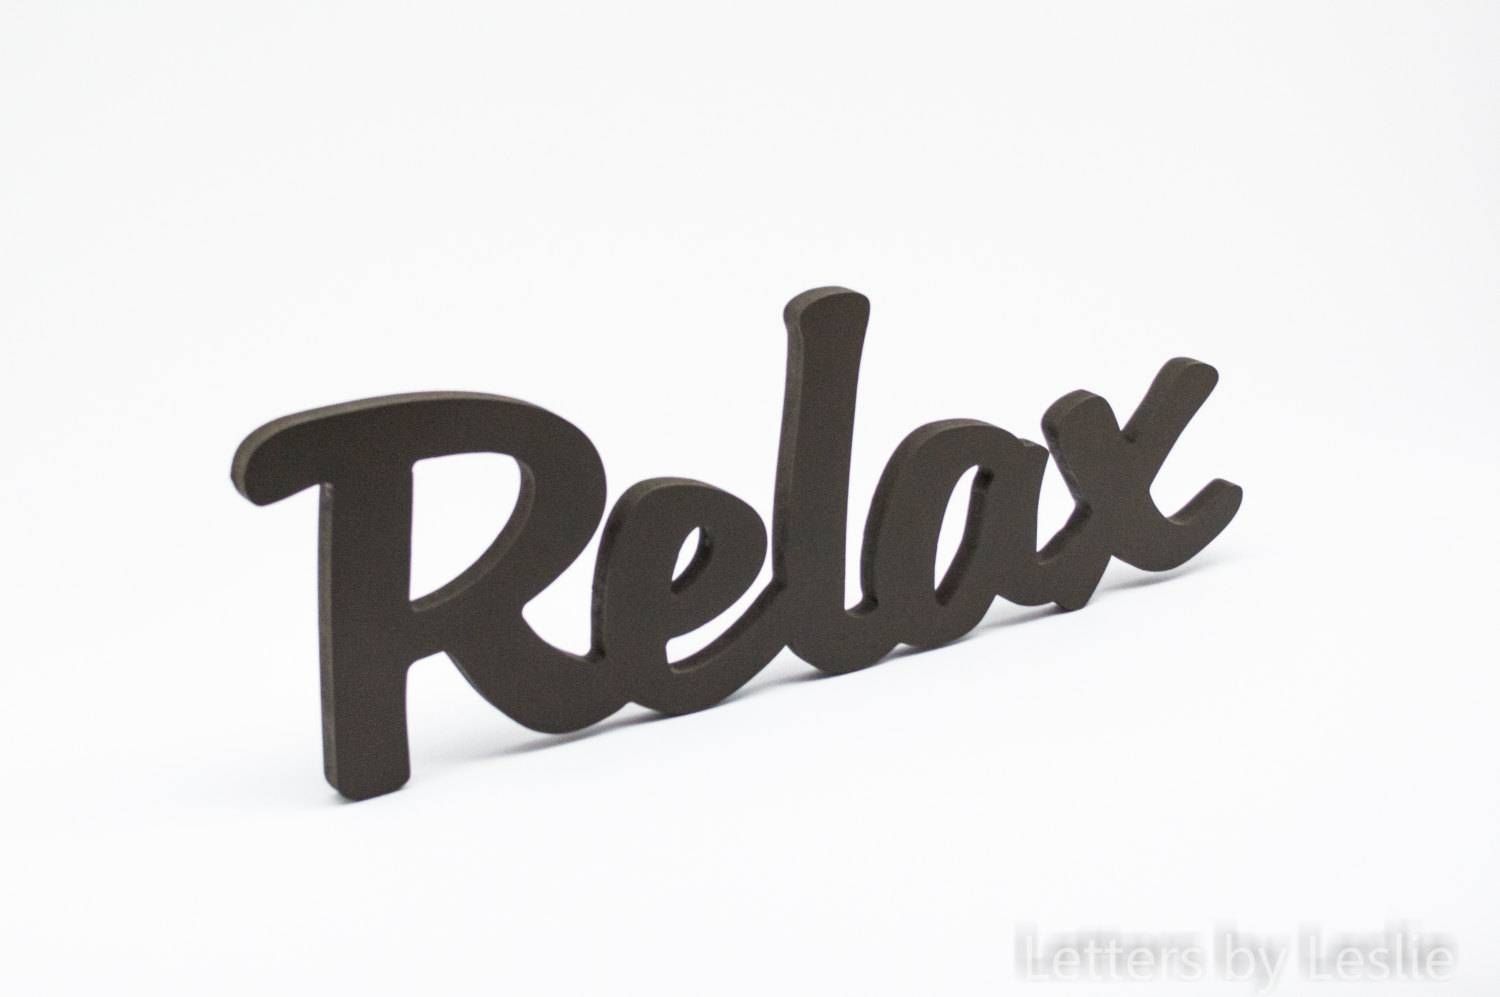 Wall Art Wooden Words | Wallartideas Intended For Newest Wooden Words Wall Art (View 12 of 30)